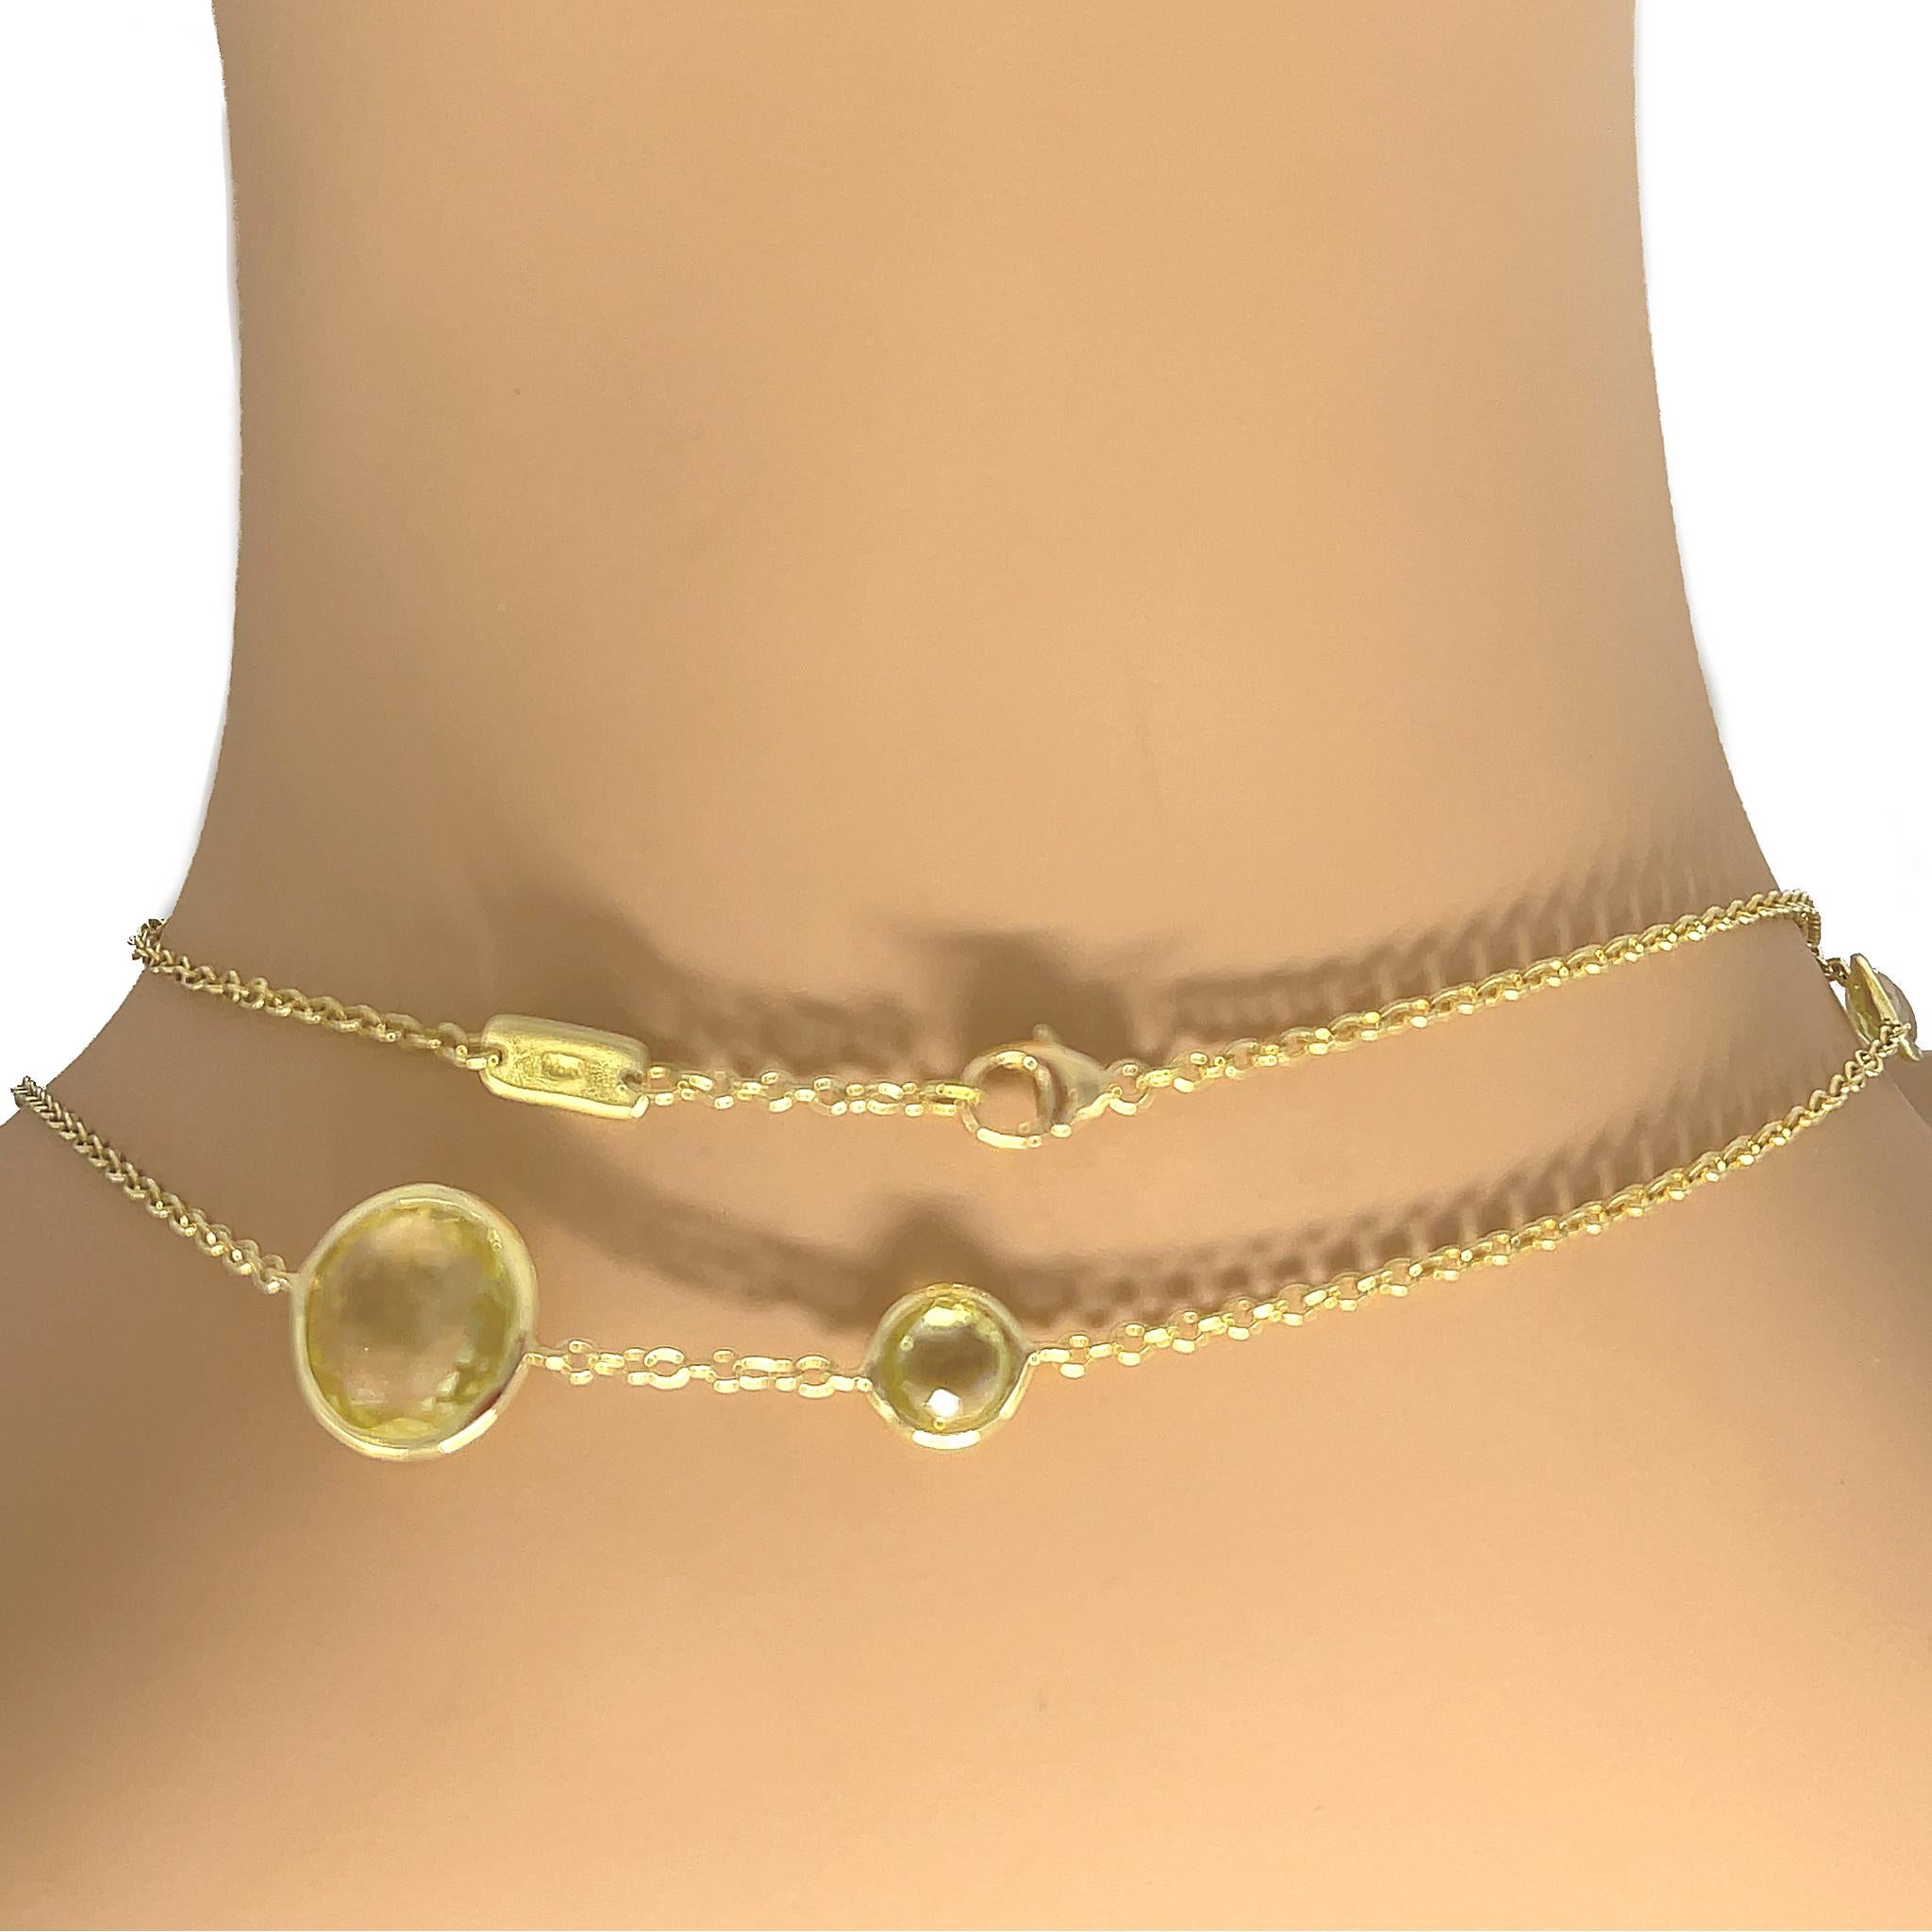 18 kt Yellow Gold
Length: 36 inches
Total Weight: 22.63 grams